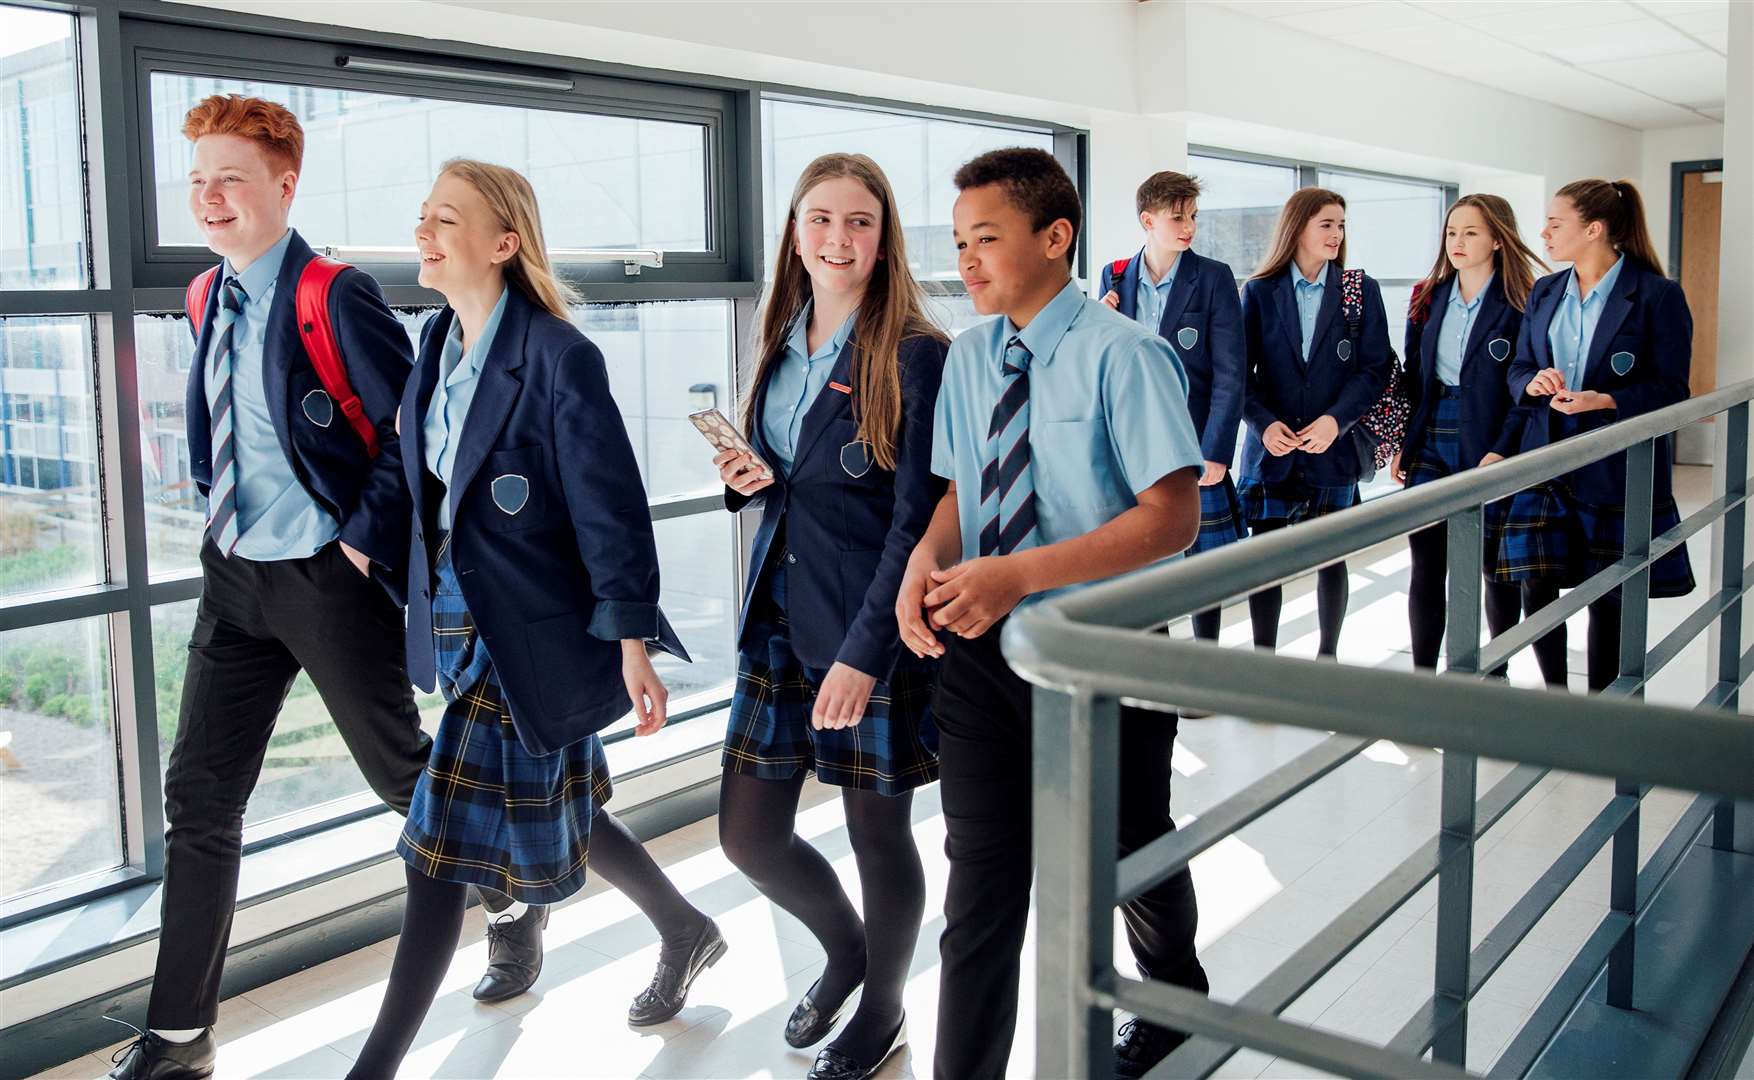 The new rules will affect both primary and secondary schools. Image: iStock.